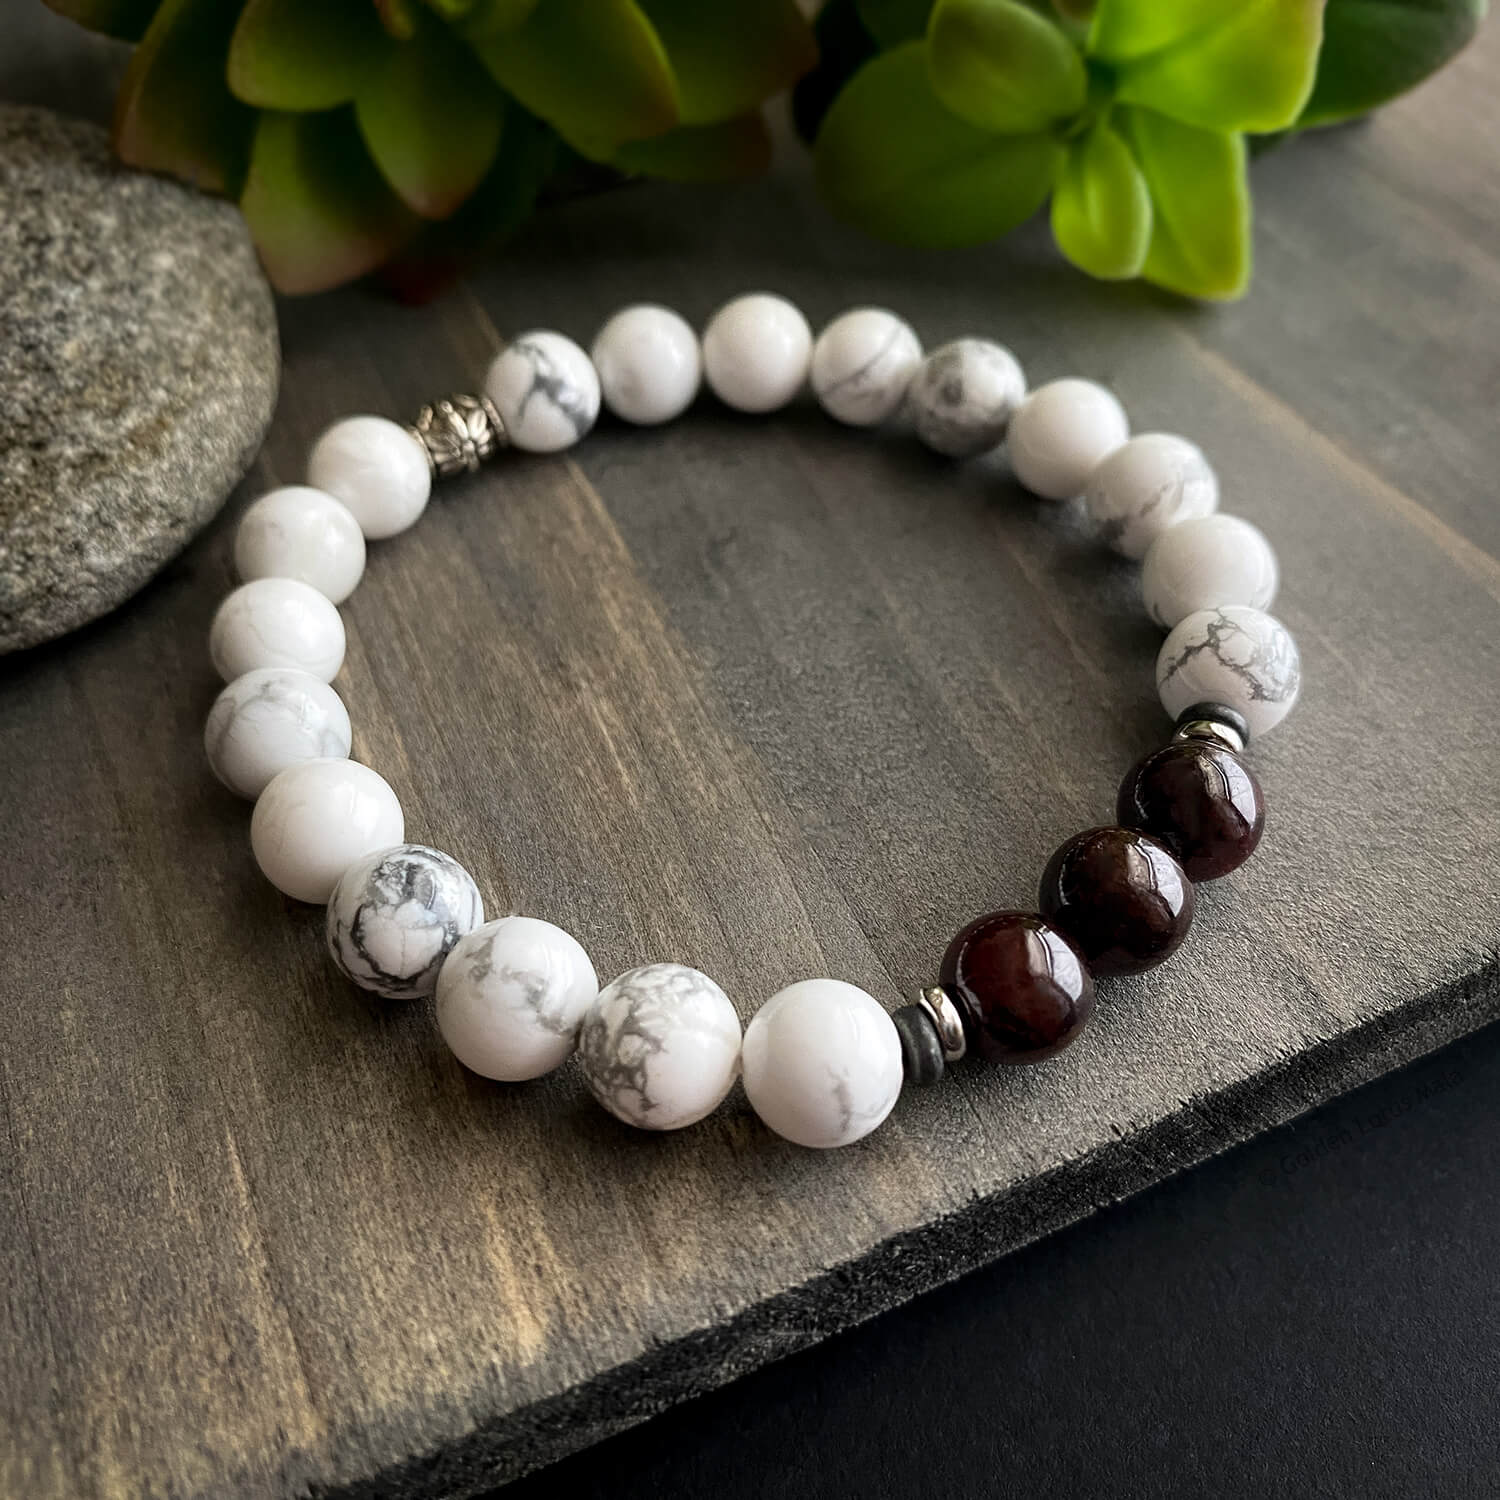 White Marble Howlite Stone Bead Bracelet with Bronze Bar and Spacers - 10mm